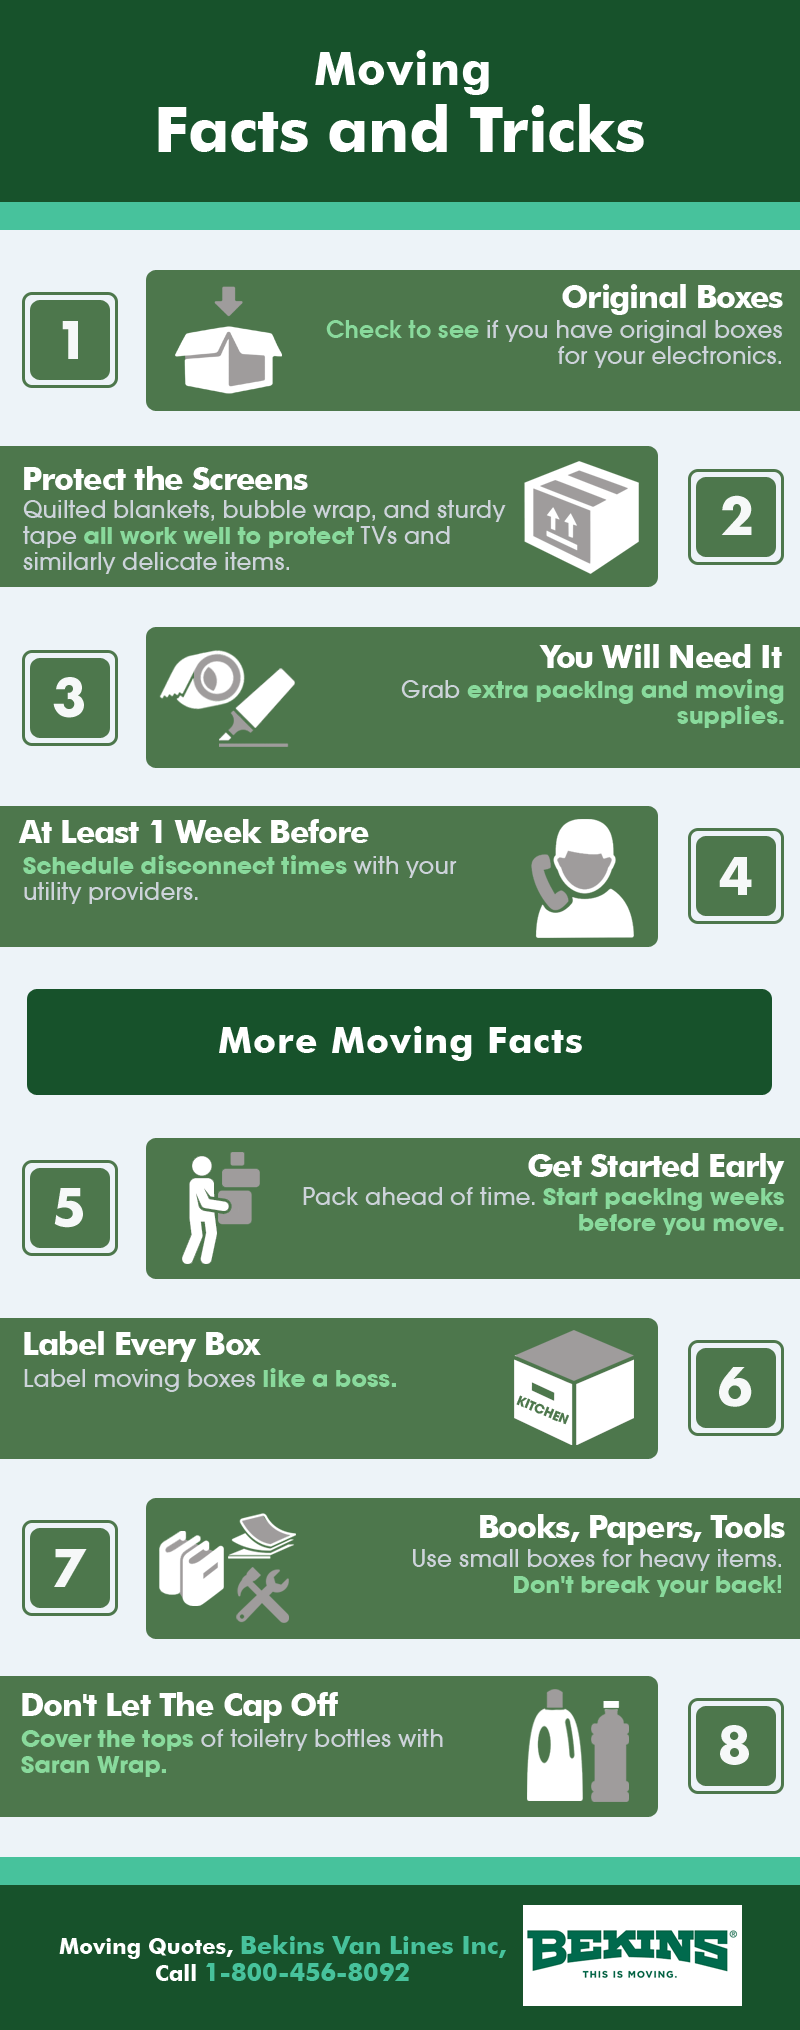 Moving Facts and Tricks | Shared Info Graphics